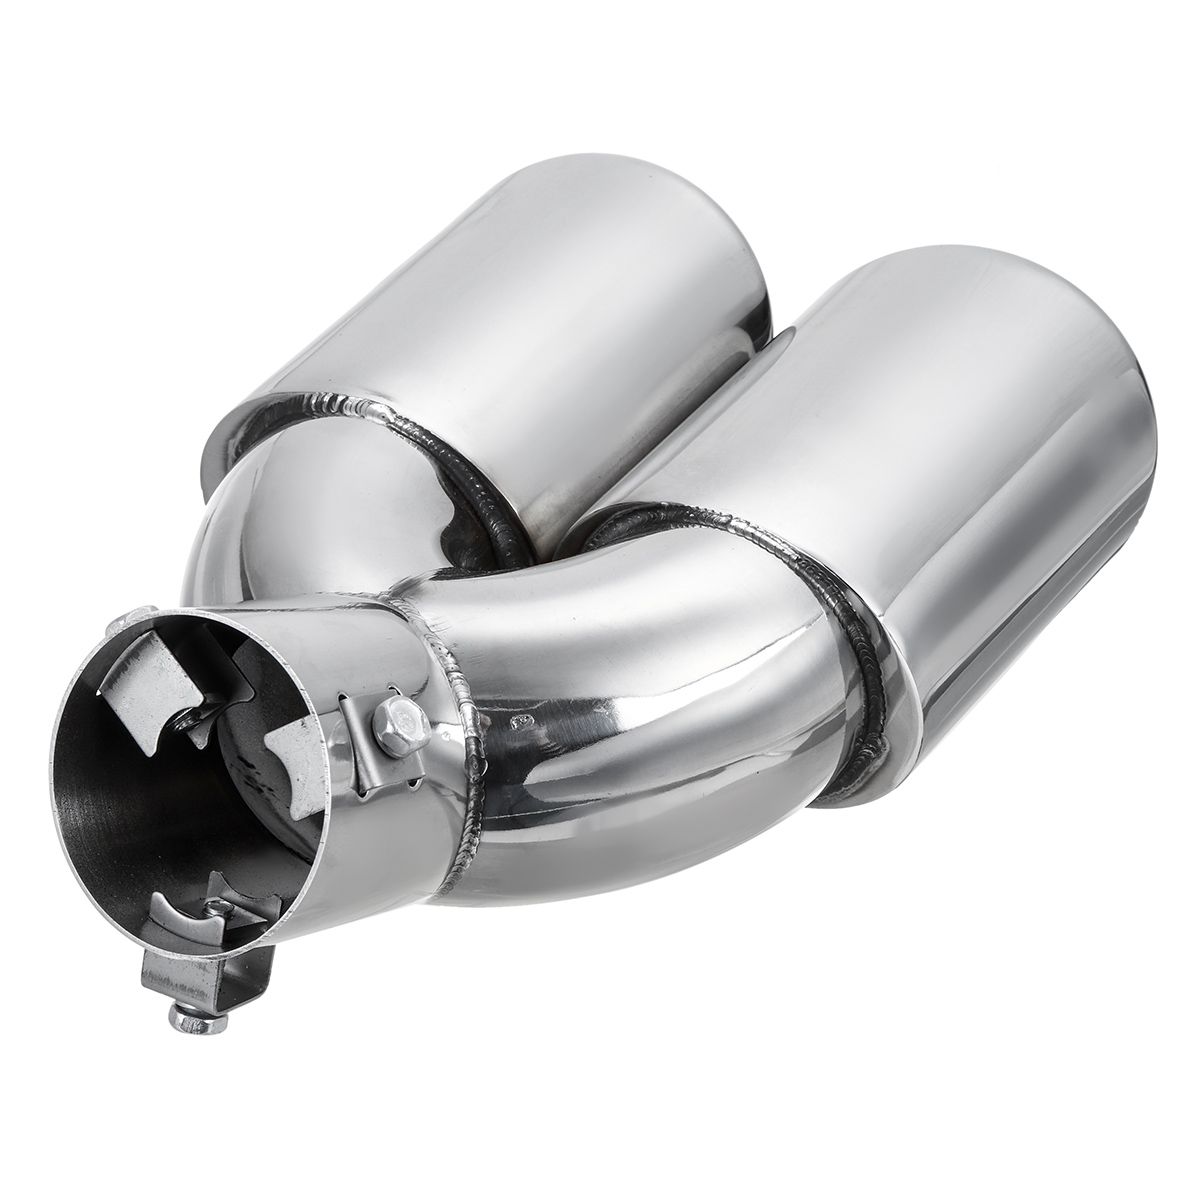 Universal-63mm-Car-Inlet-Dual-Exhaust-Pipe-Trim-Tip-Tail-Muffler-Stainless-Steel-1677084